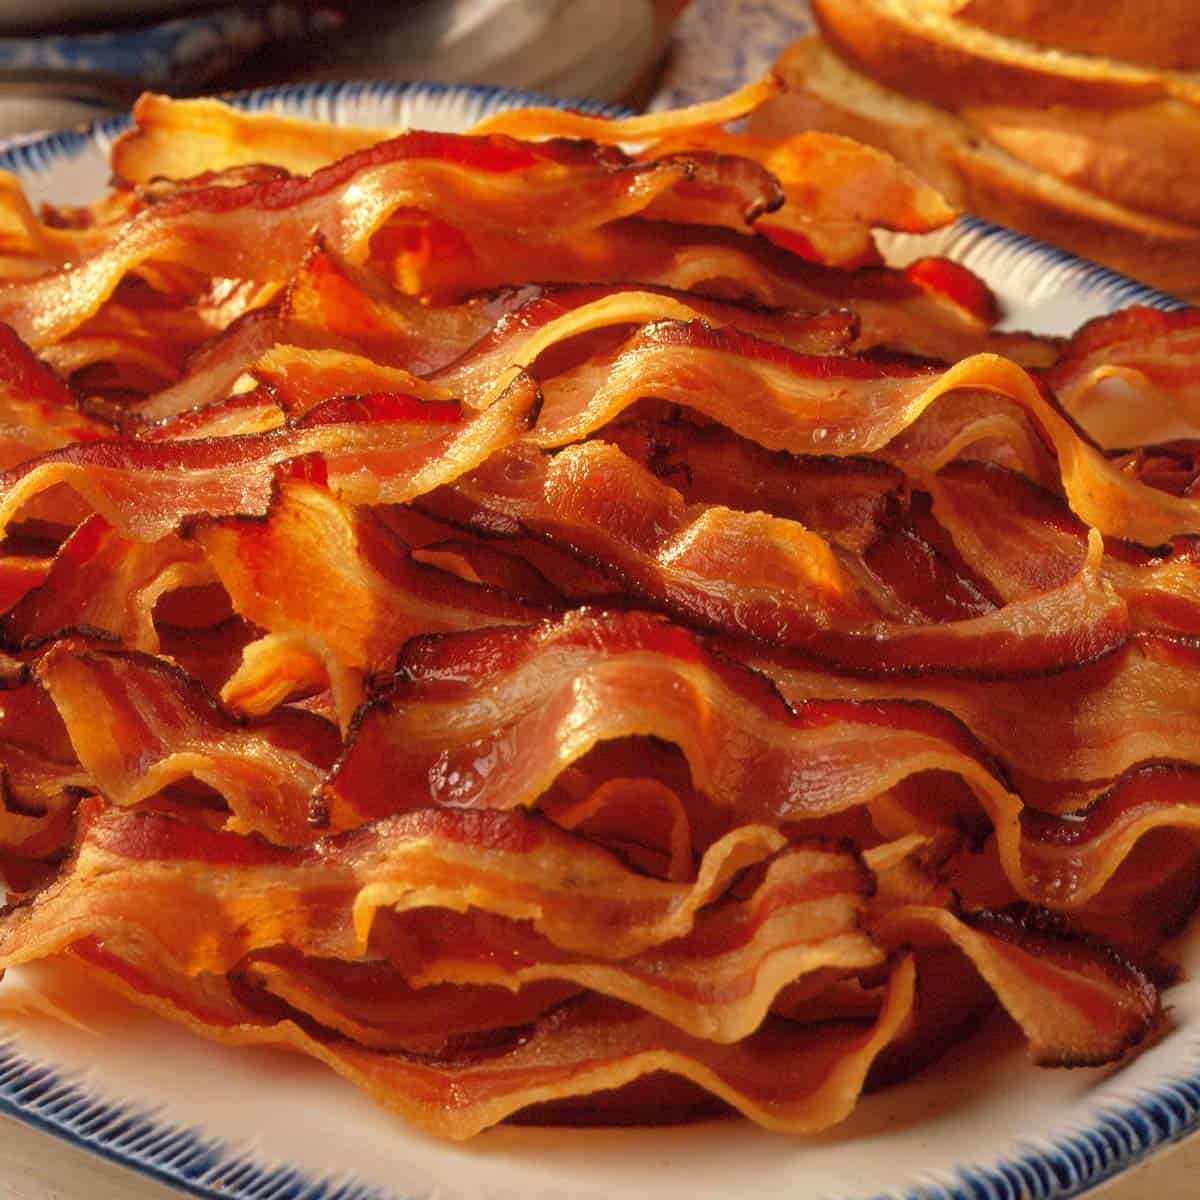 A plate of cooked bacon.